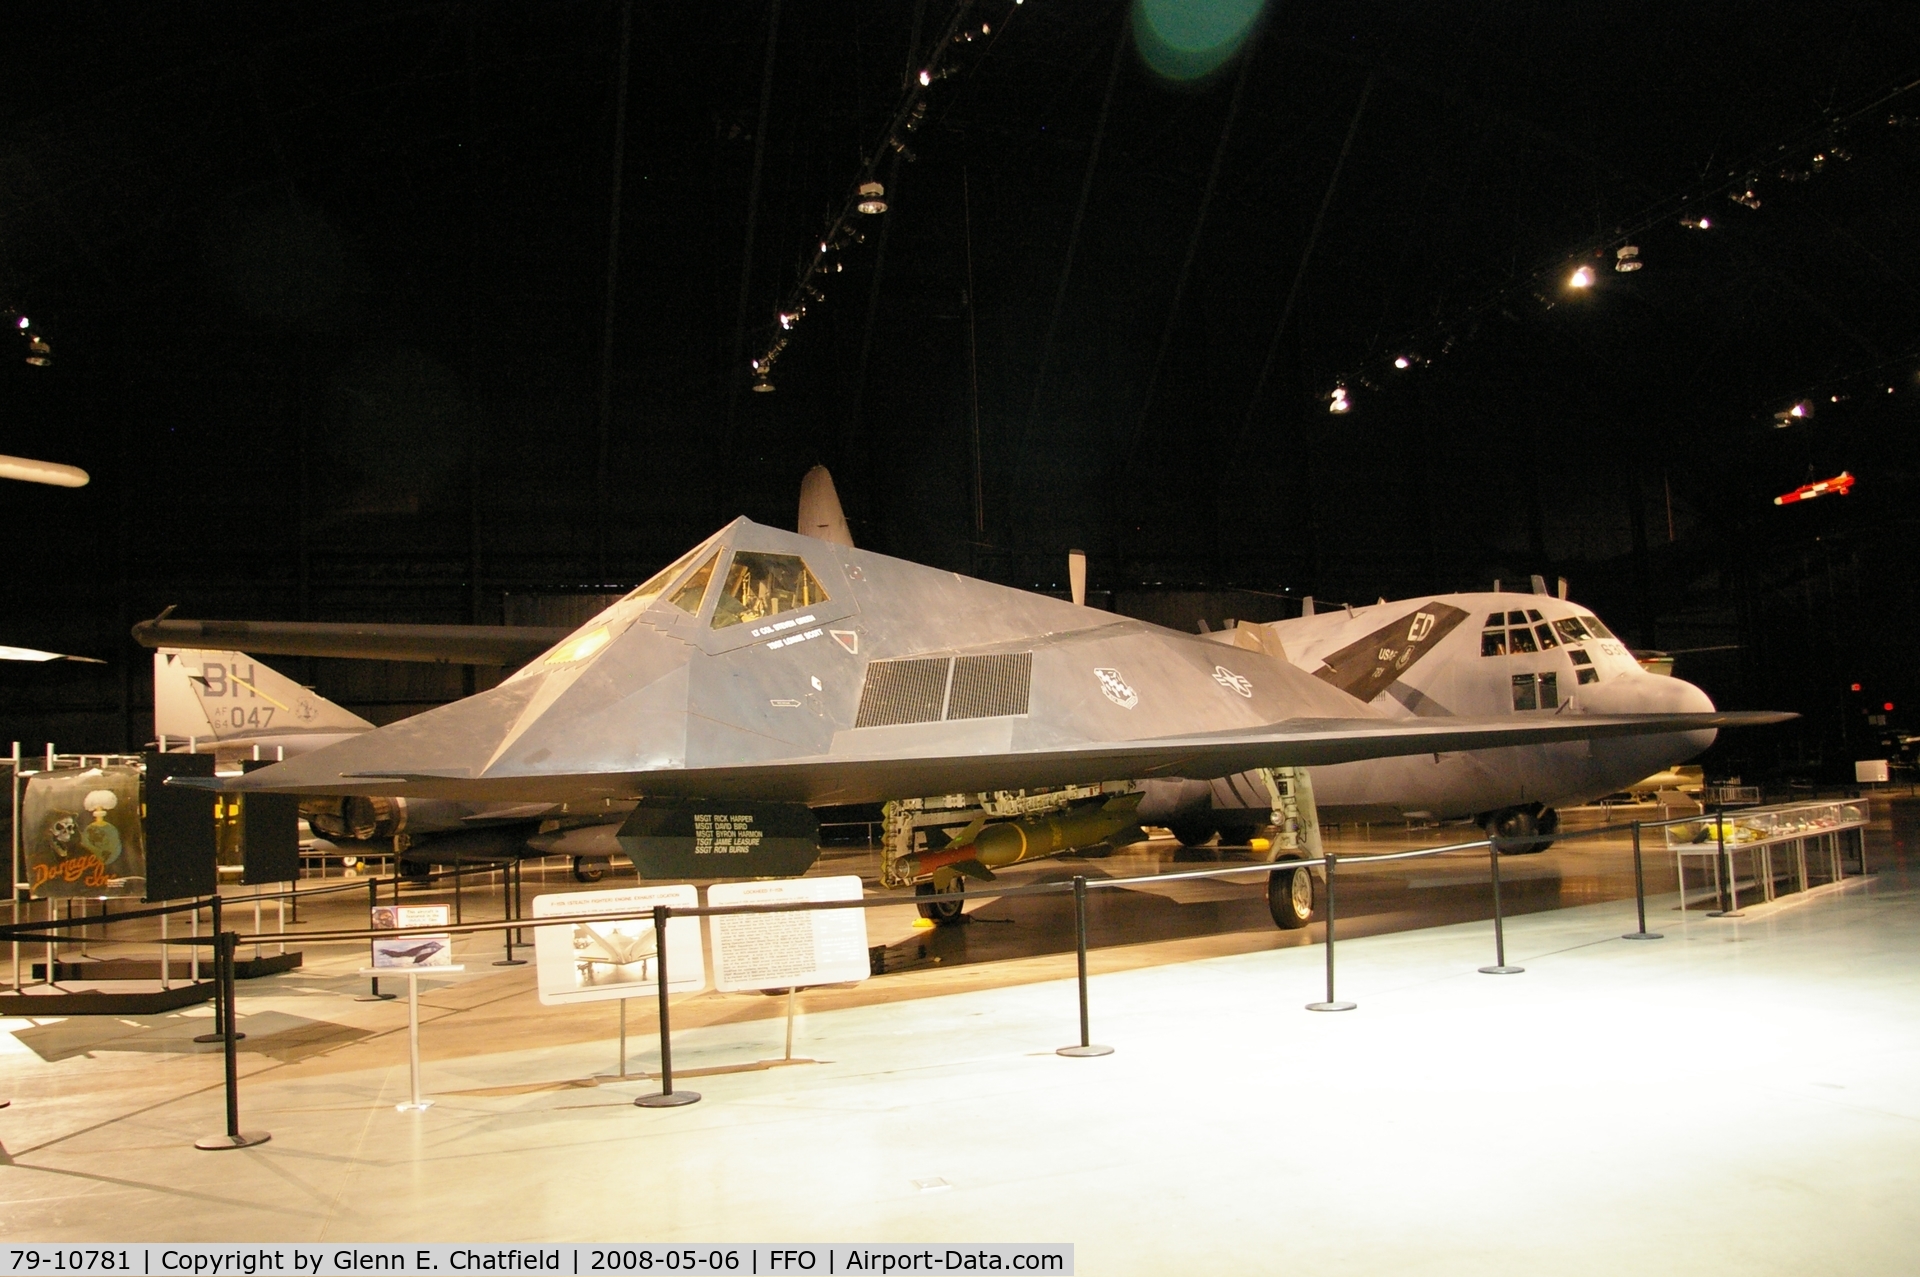 79-10781, 1979 Lockheed YF-117A Nighthawk C/N A.4006, Displayed at the National Museum of the U.S. Air Force